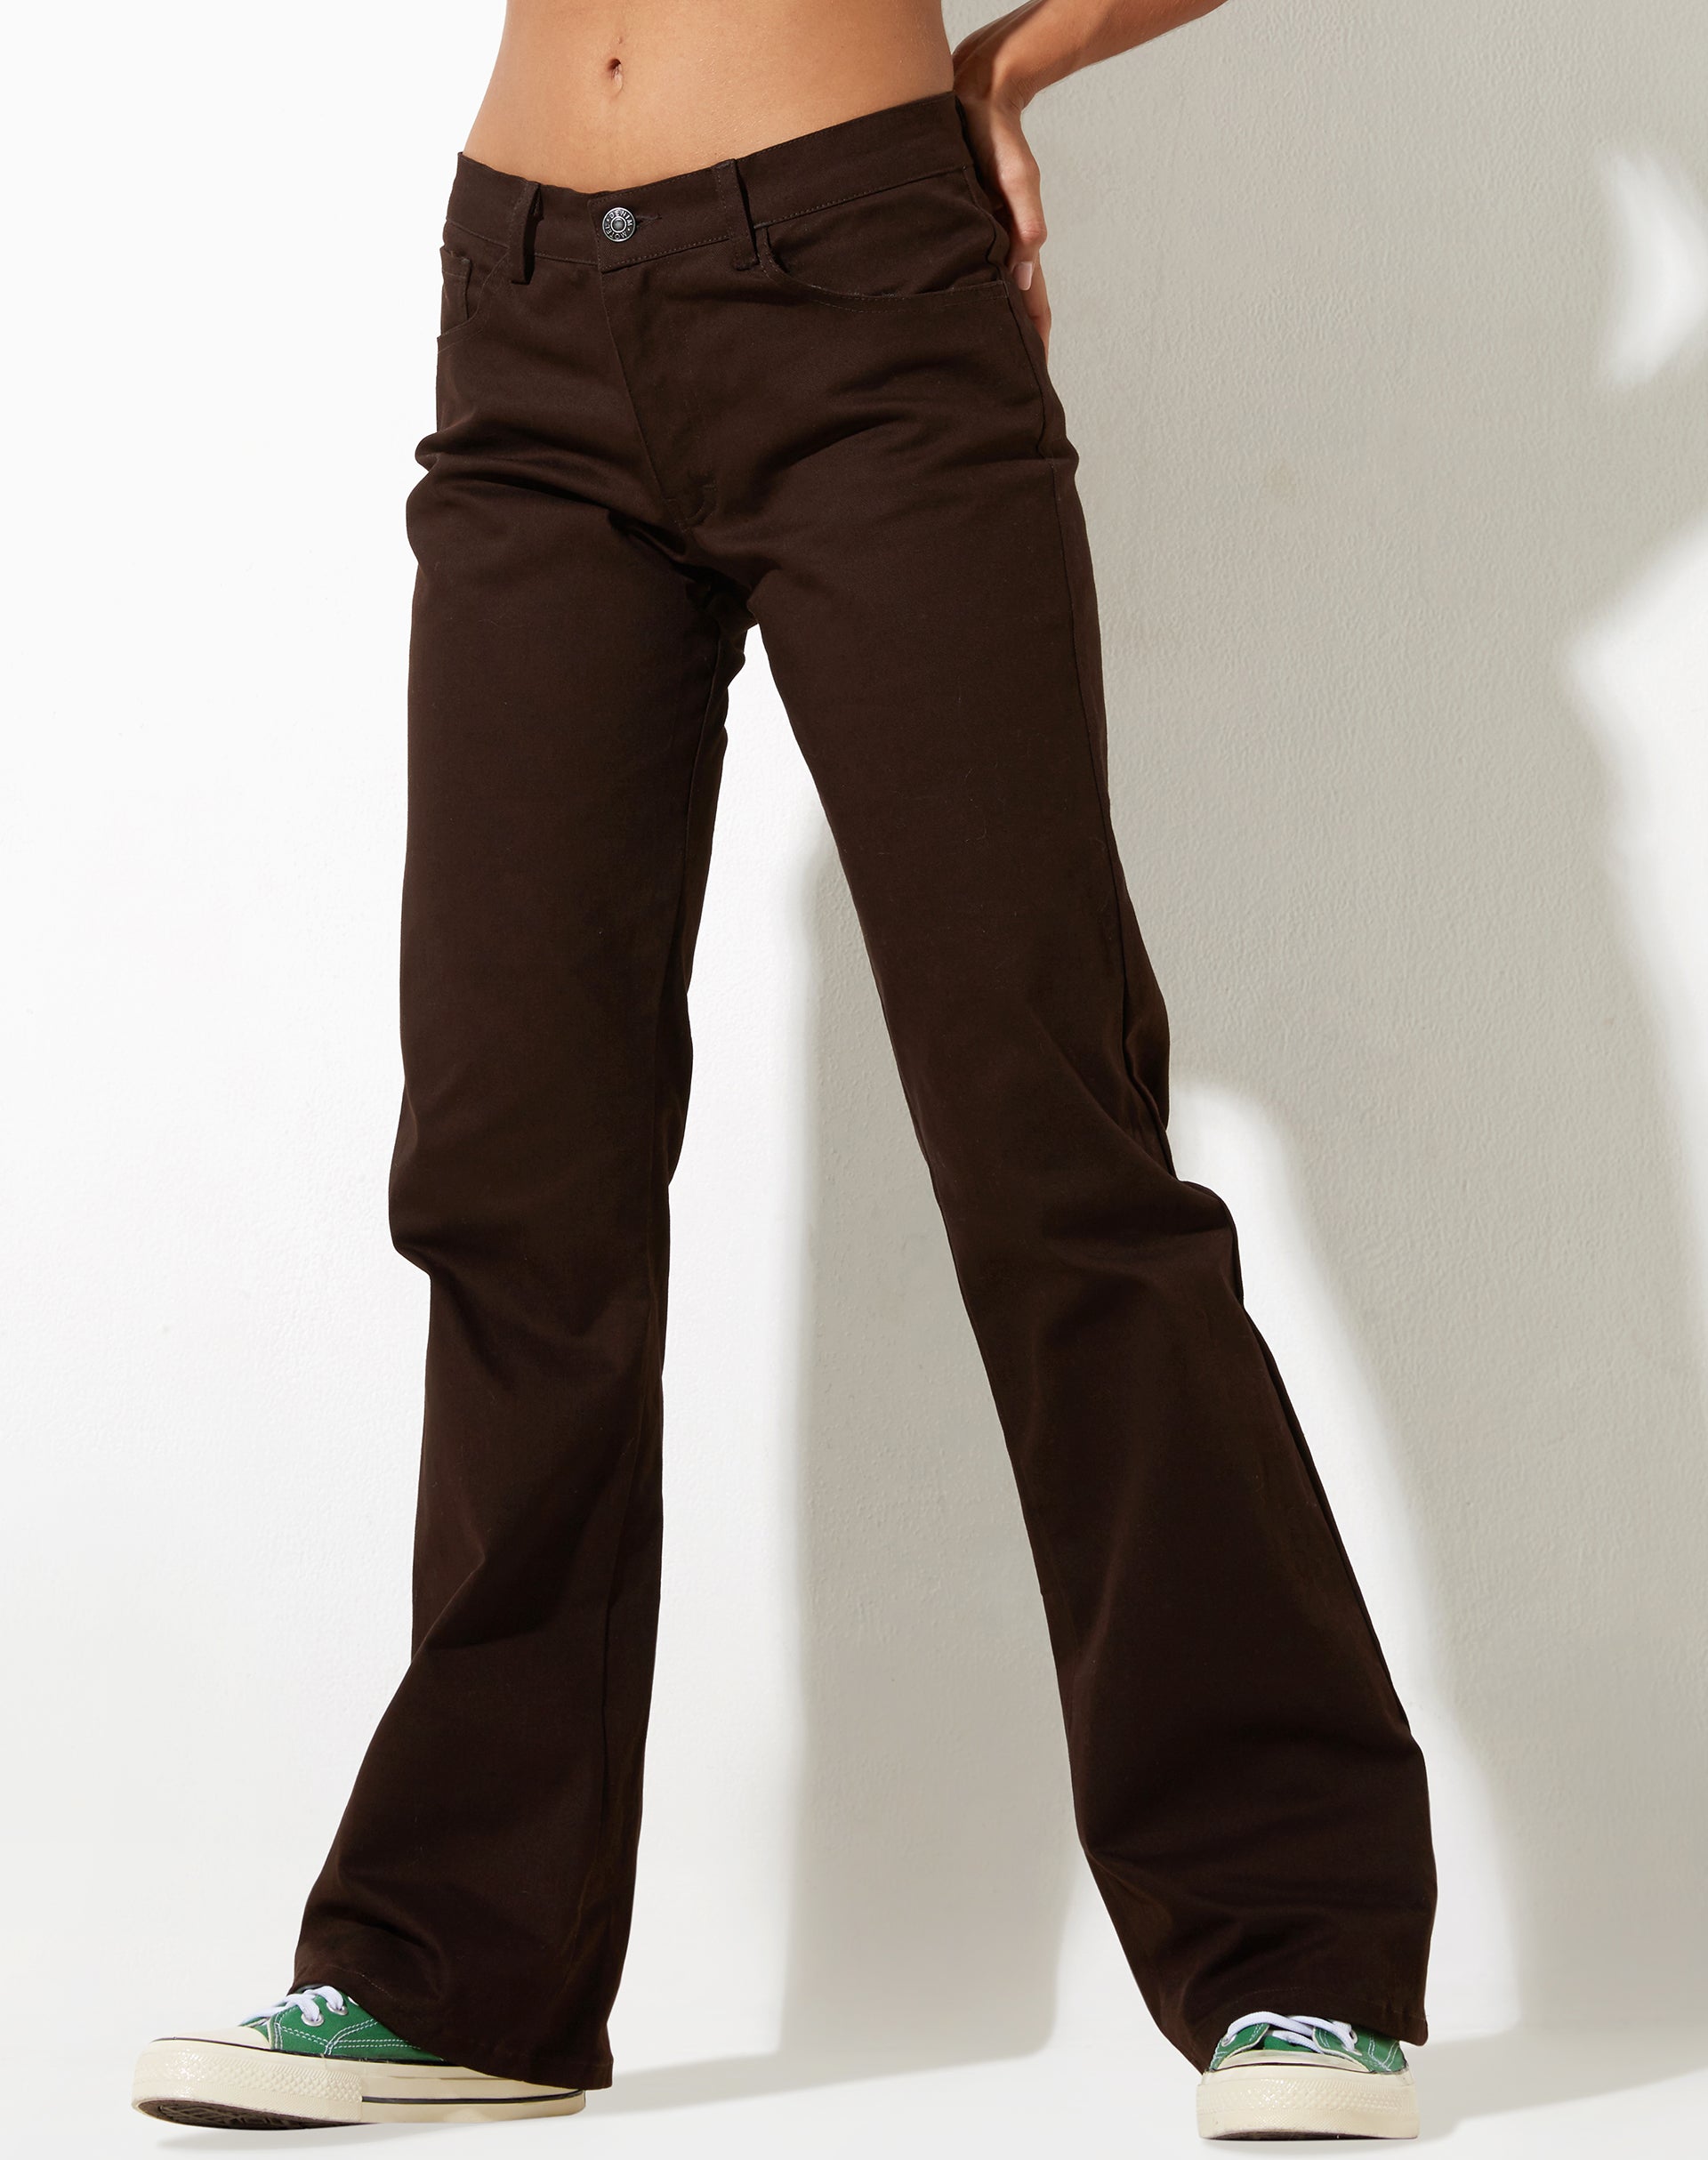 image of Jopan Flare Trouser in Twill Bitter Chocolate